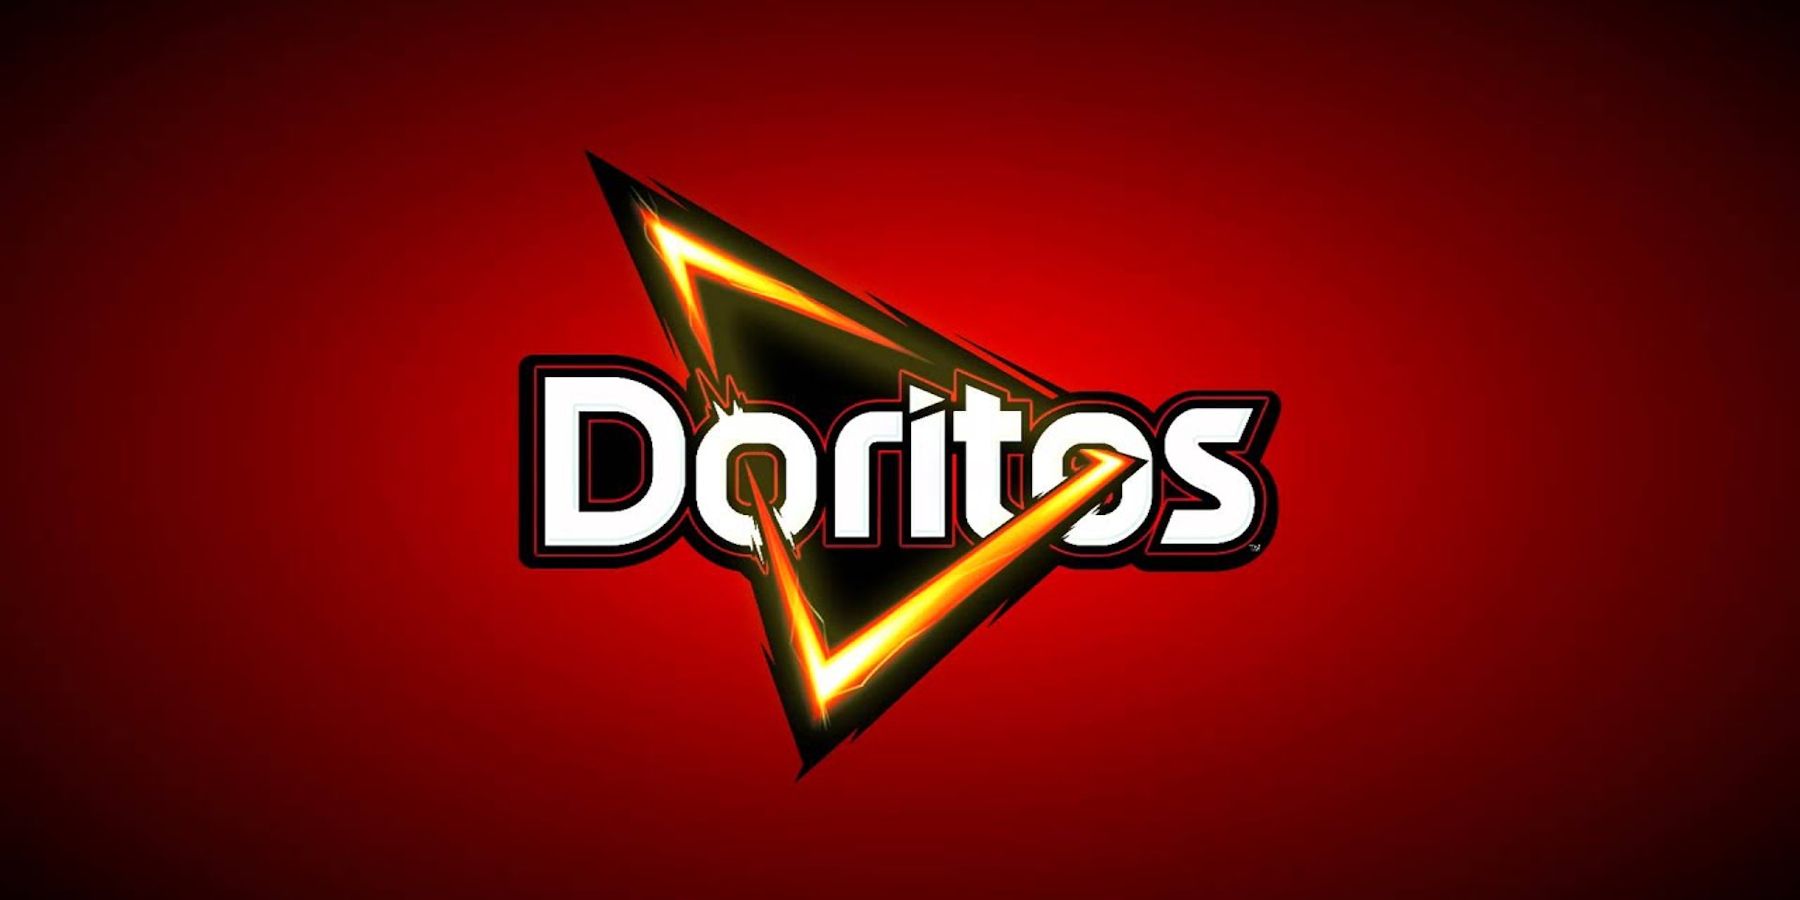 Xbox and Doritos Could Be Collaborating Yet Again